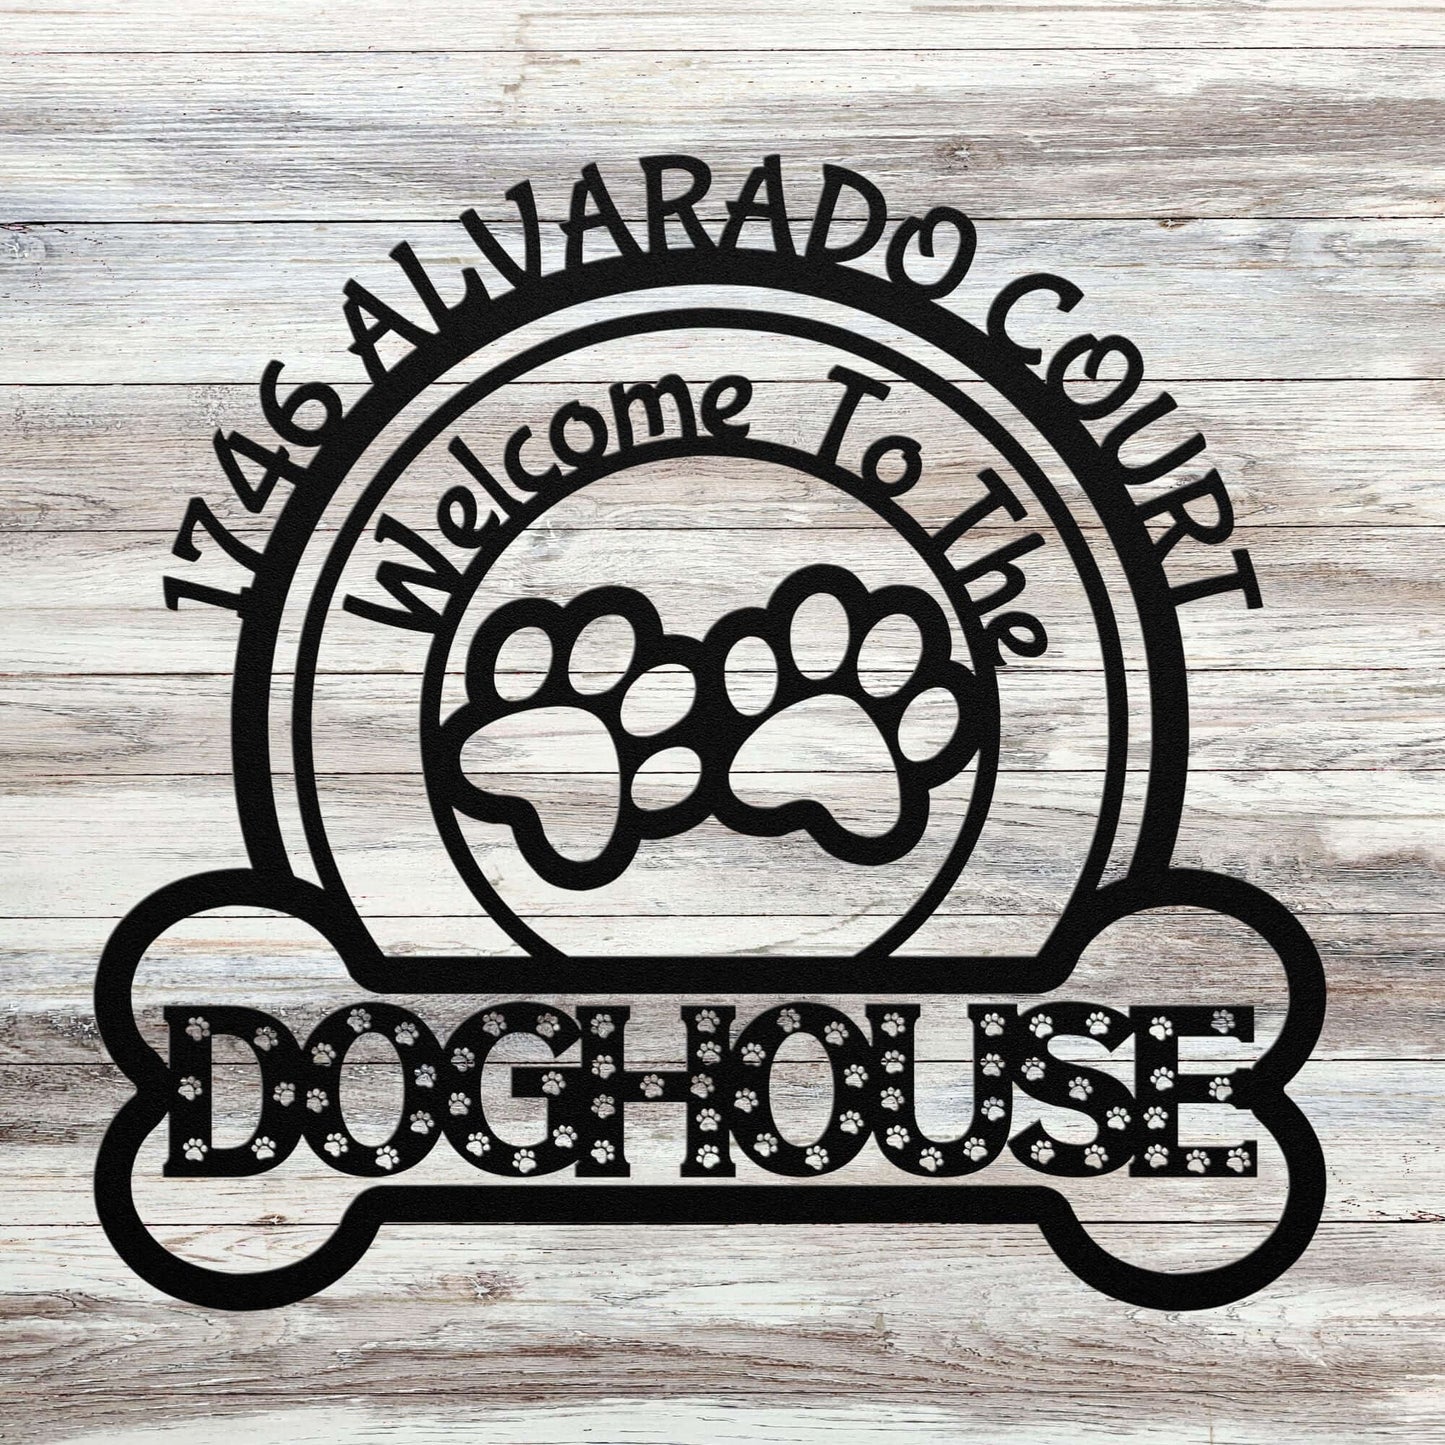 Personalized Welcome To The Doghouse Metal House Number & Address Sign